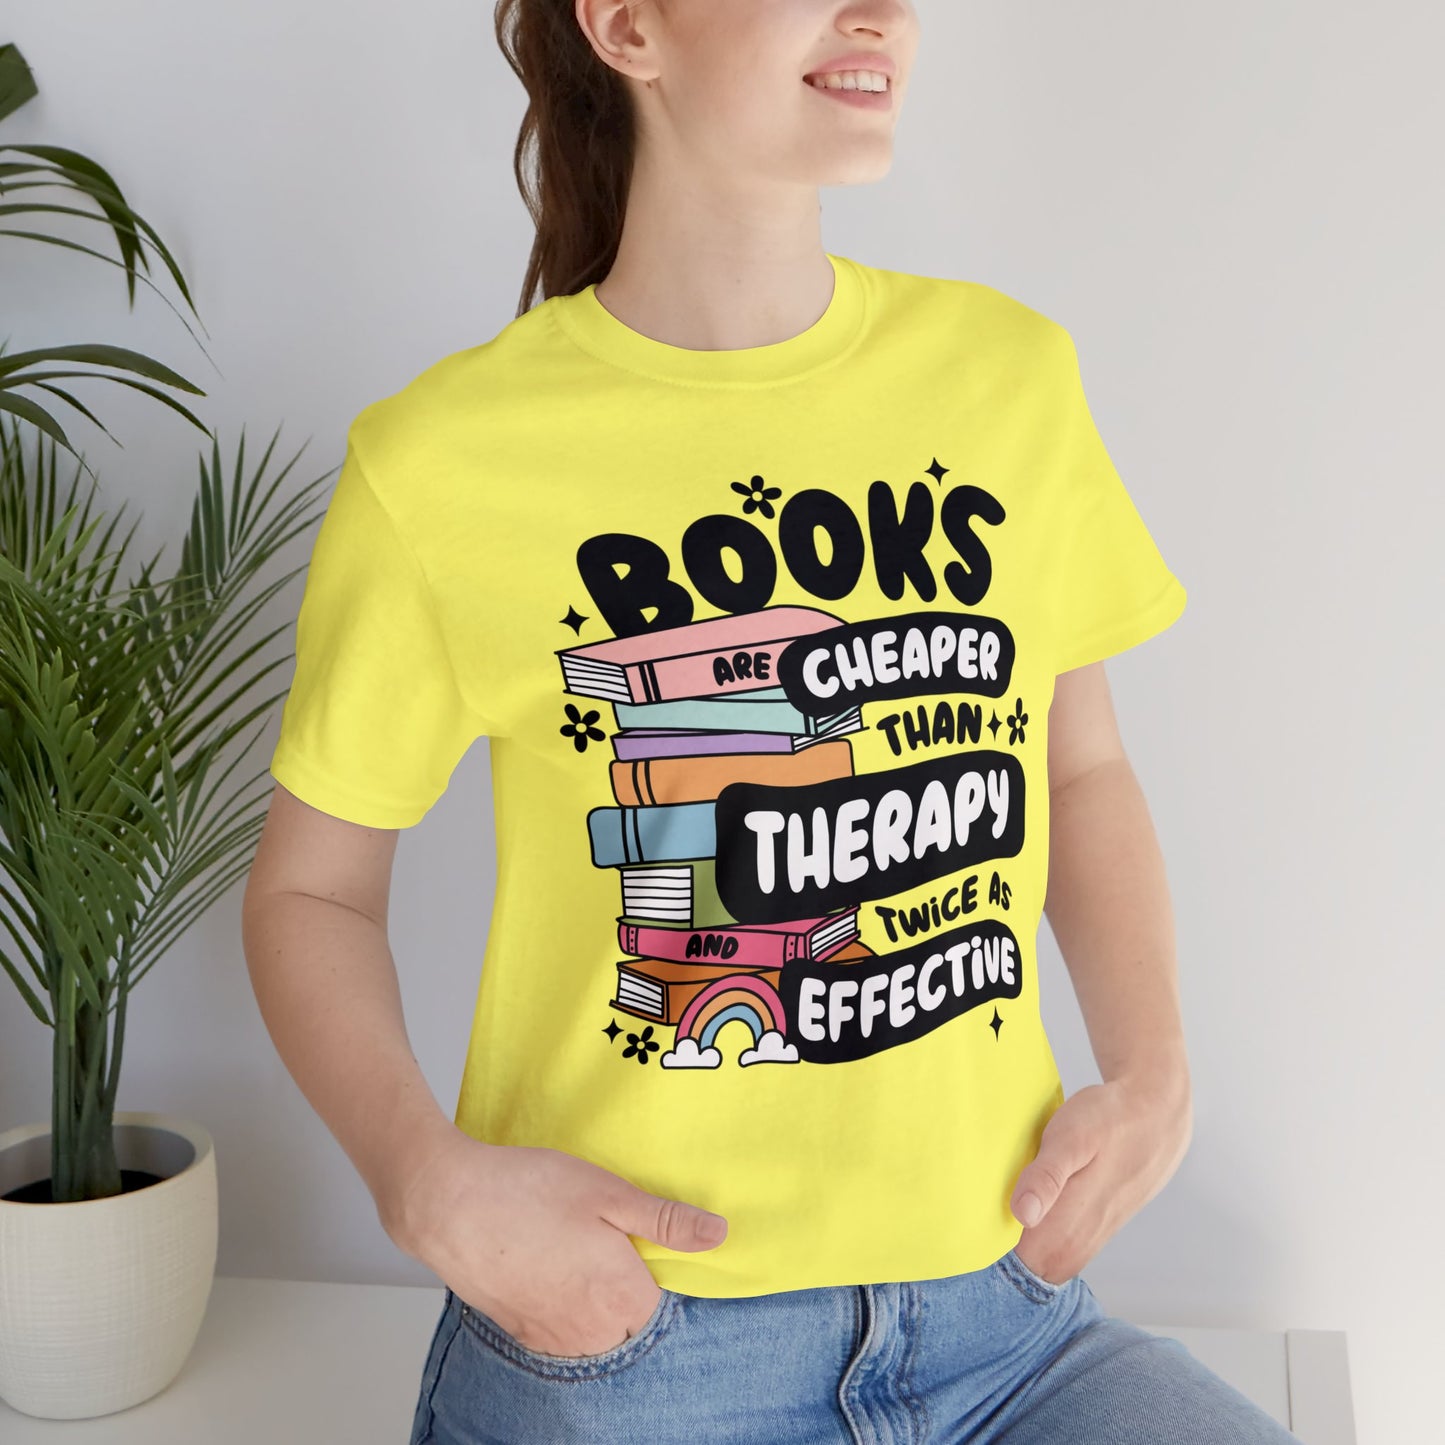 Books Are Cheaper Than Therapy Short Sleeve Tee